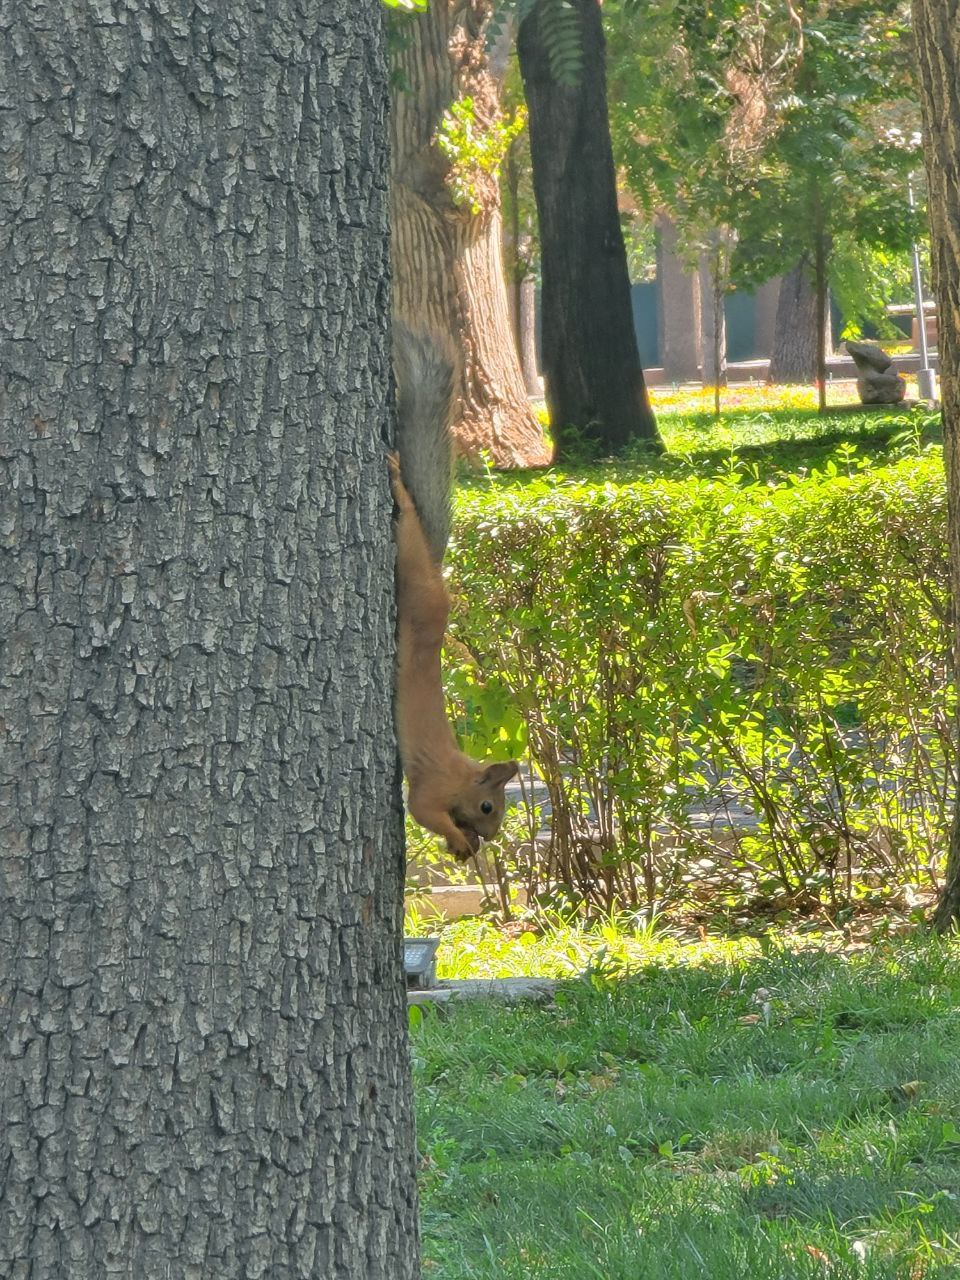 brown squirrel with a gray tail on a tree with its head pointed towards the ground, holding an acorn to its mouth while hanging on to the tree with its back feet/claws